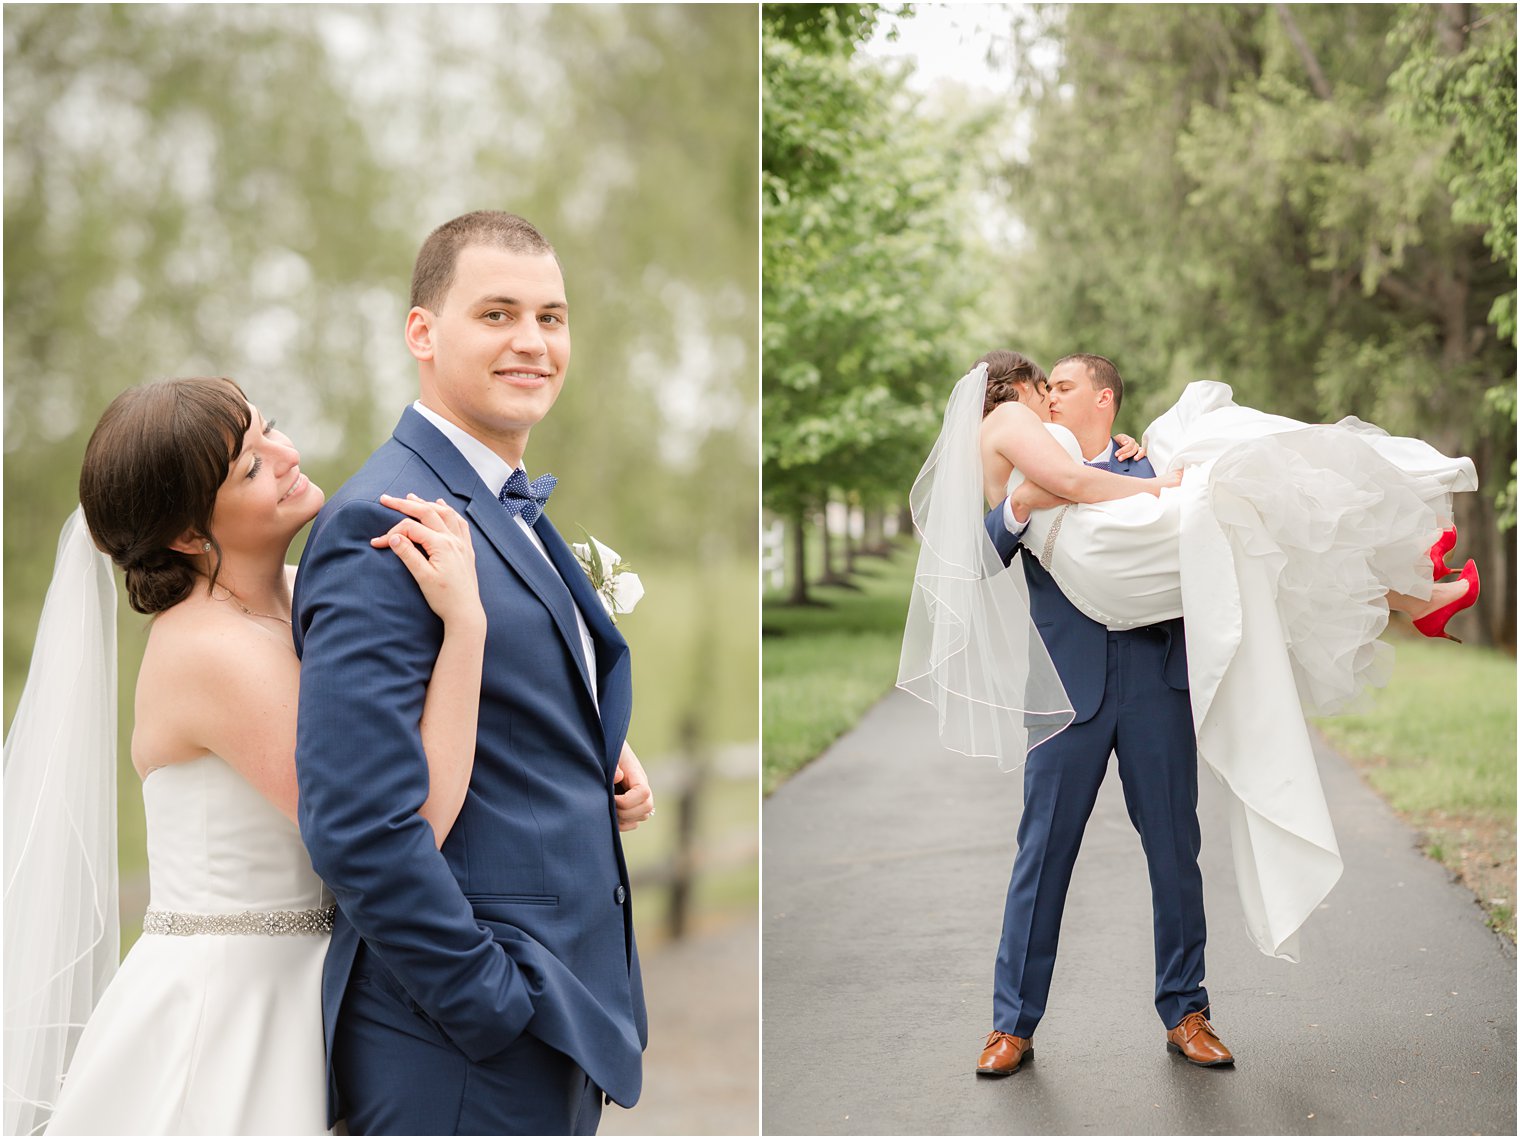 Formal bride and groom portraits at Windows on the Water at Frogbridge in Millstone NJ